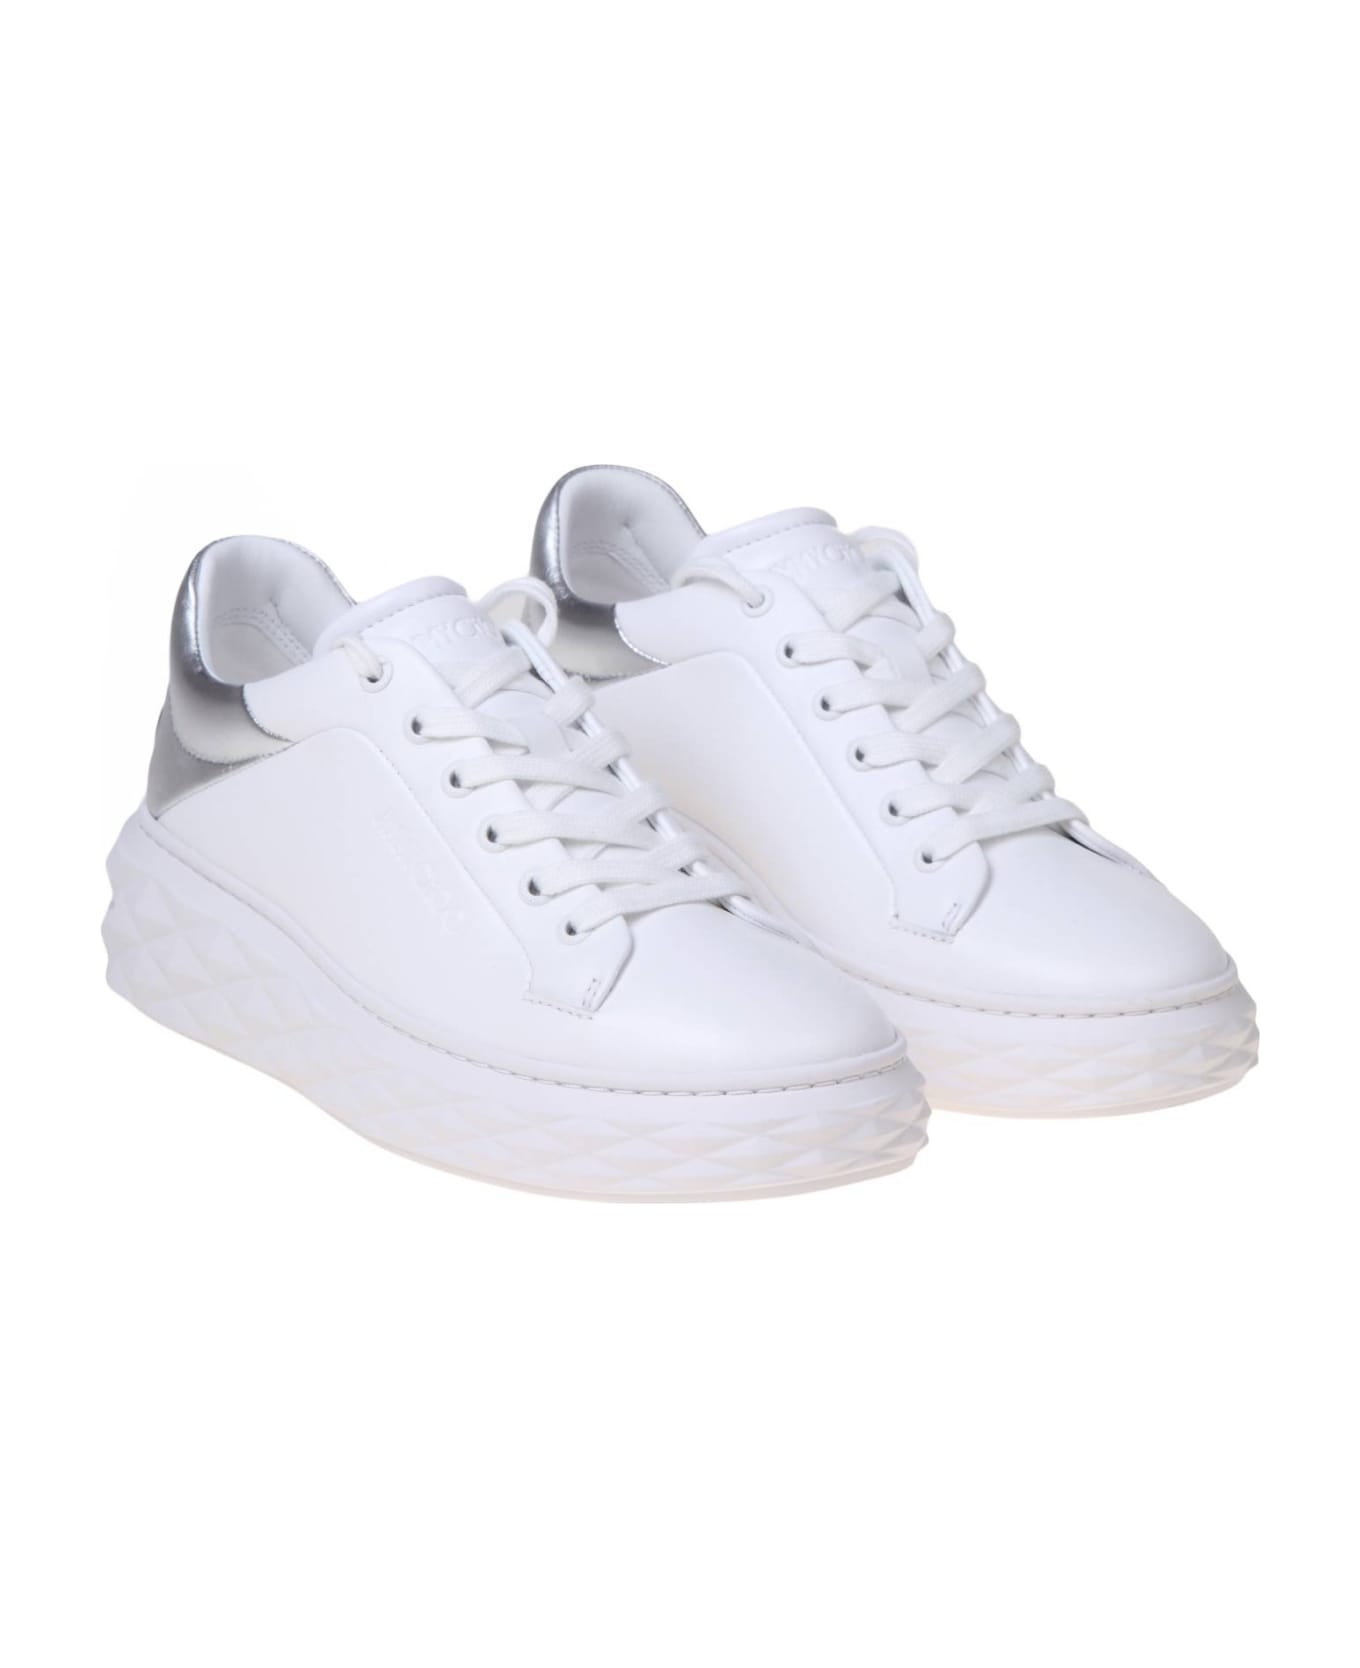 Jimmy Choo Diamond Maxi Sneakers In White And Silver Leather - White スニーカー